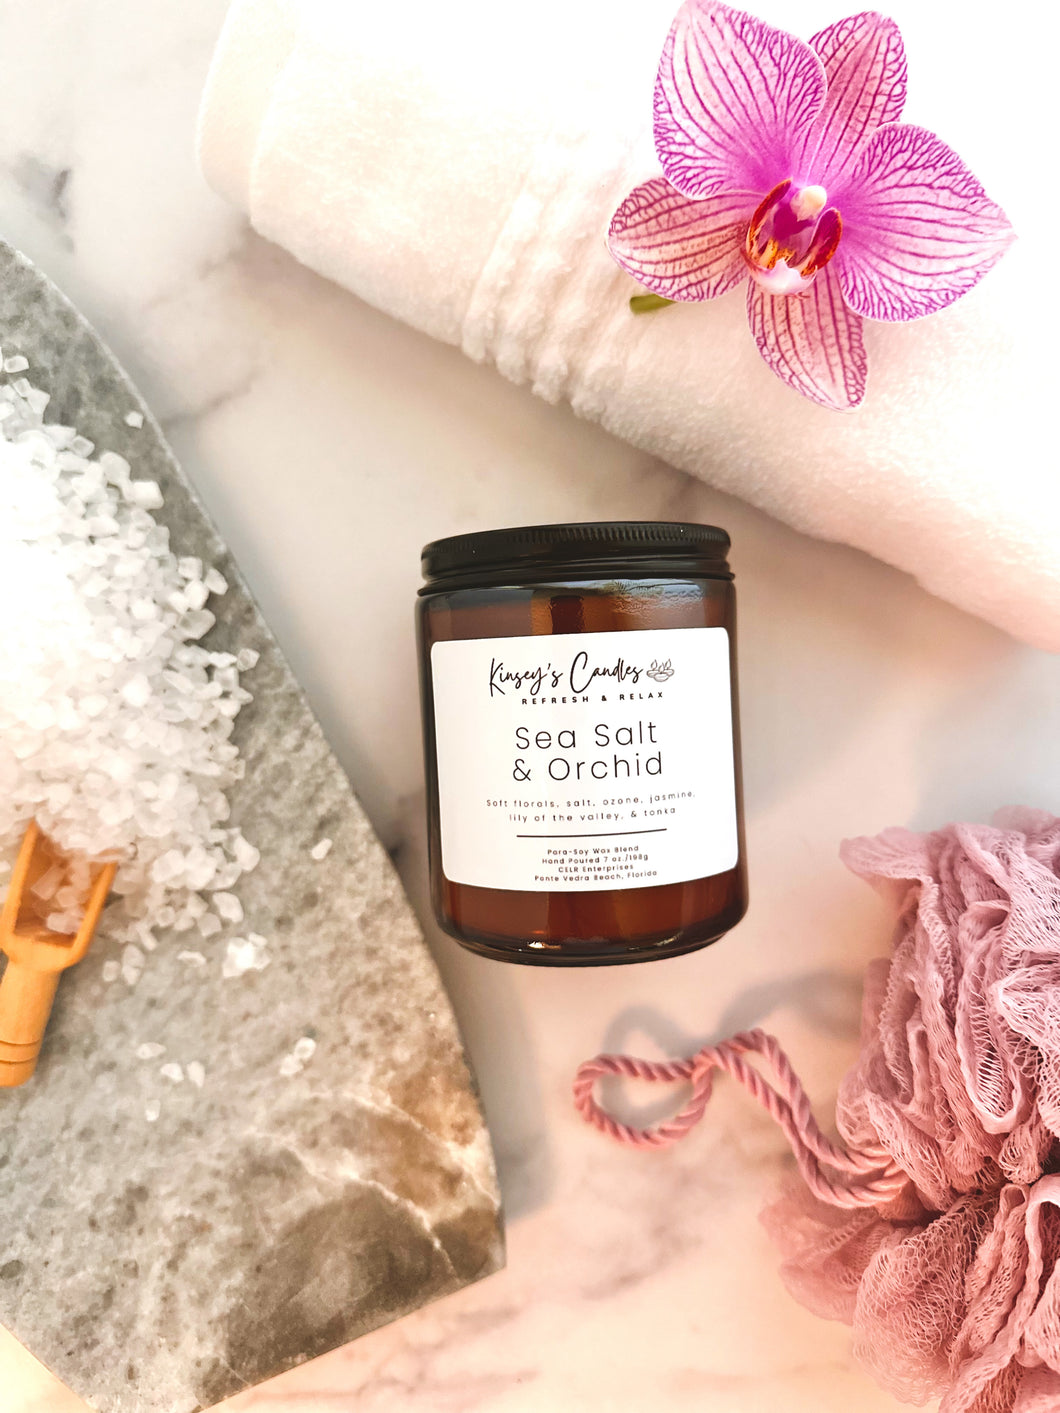 Sea Salt & Orchid Candle - Kinsey's Candles